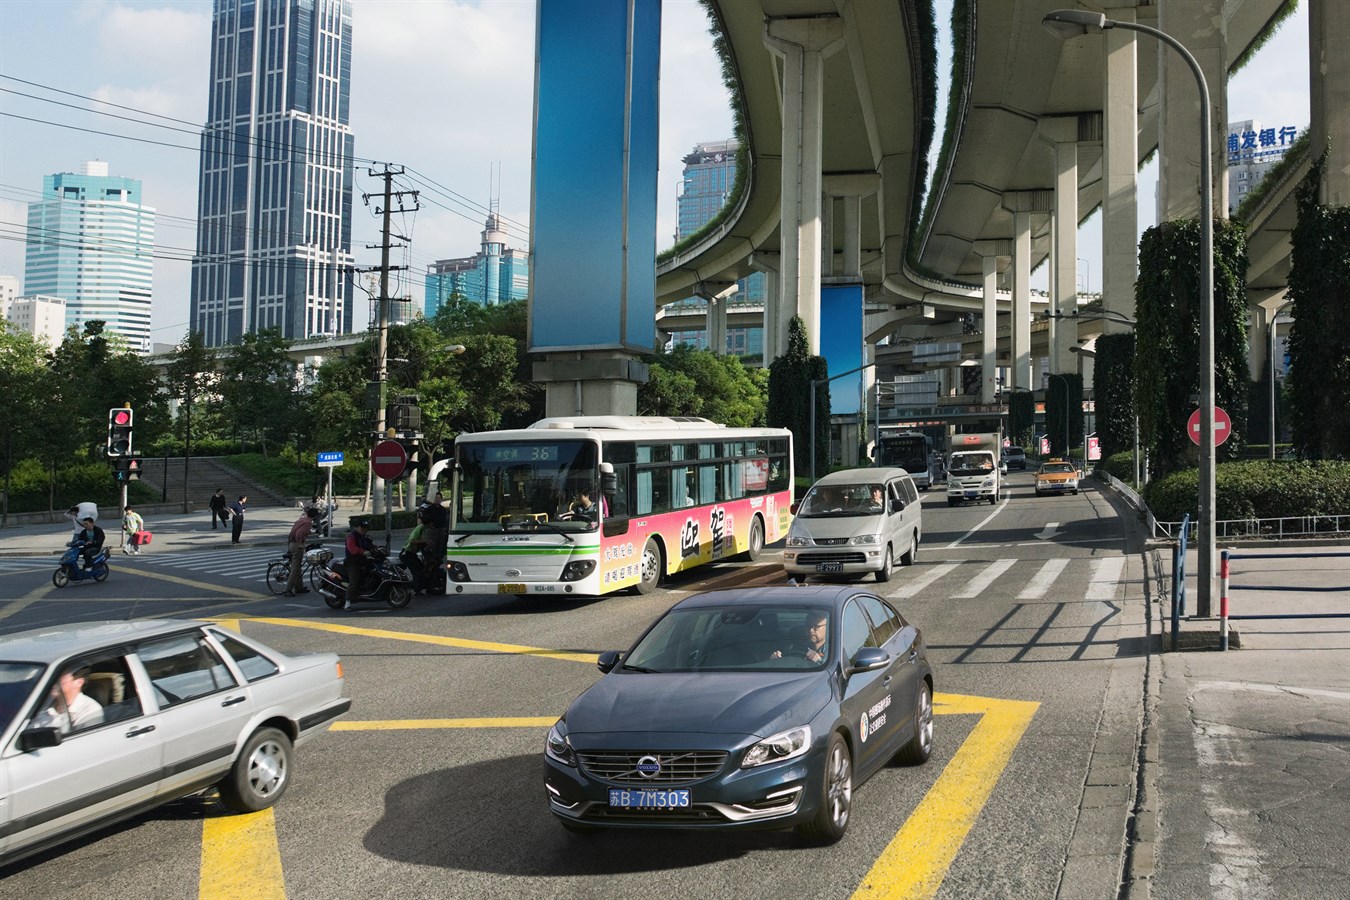 China FOT – studying driving behaviour in Chinese megacities